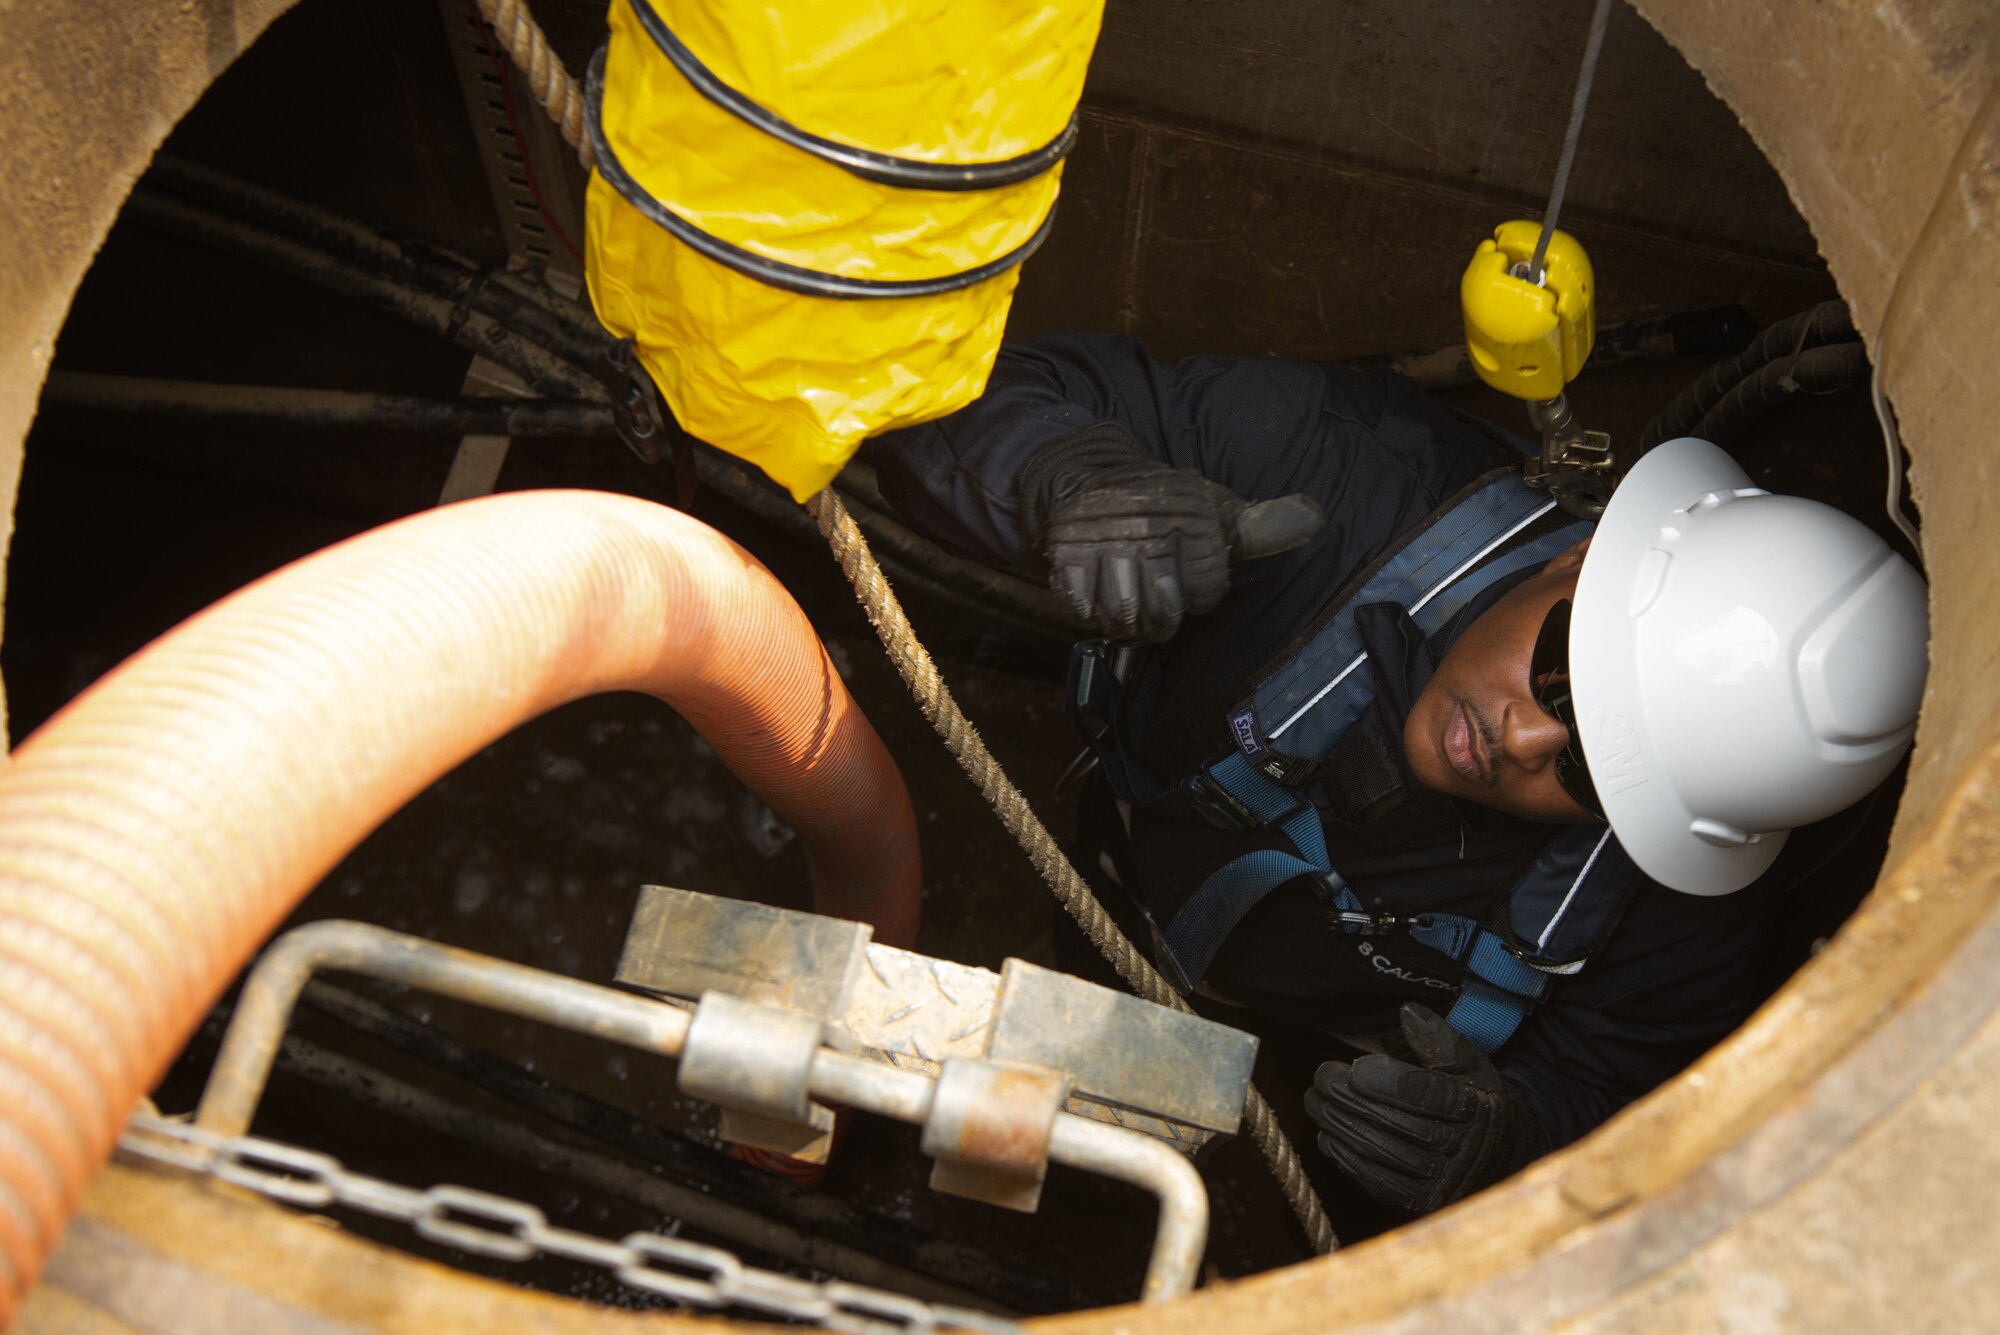 Senior Airman Jayrell Norfleet, 51st Civil Engineer Squadron electrical systems journeyman, enters a confined space to guide electrical wiring underground at Osan Air Base, Republic of Korea, April 21, 2022.